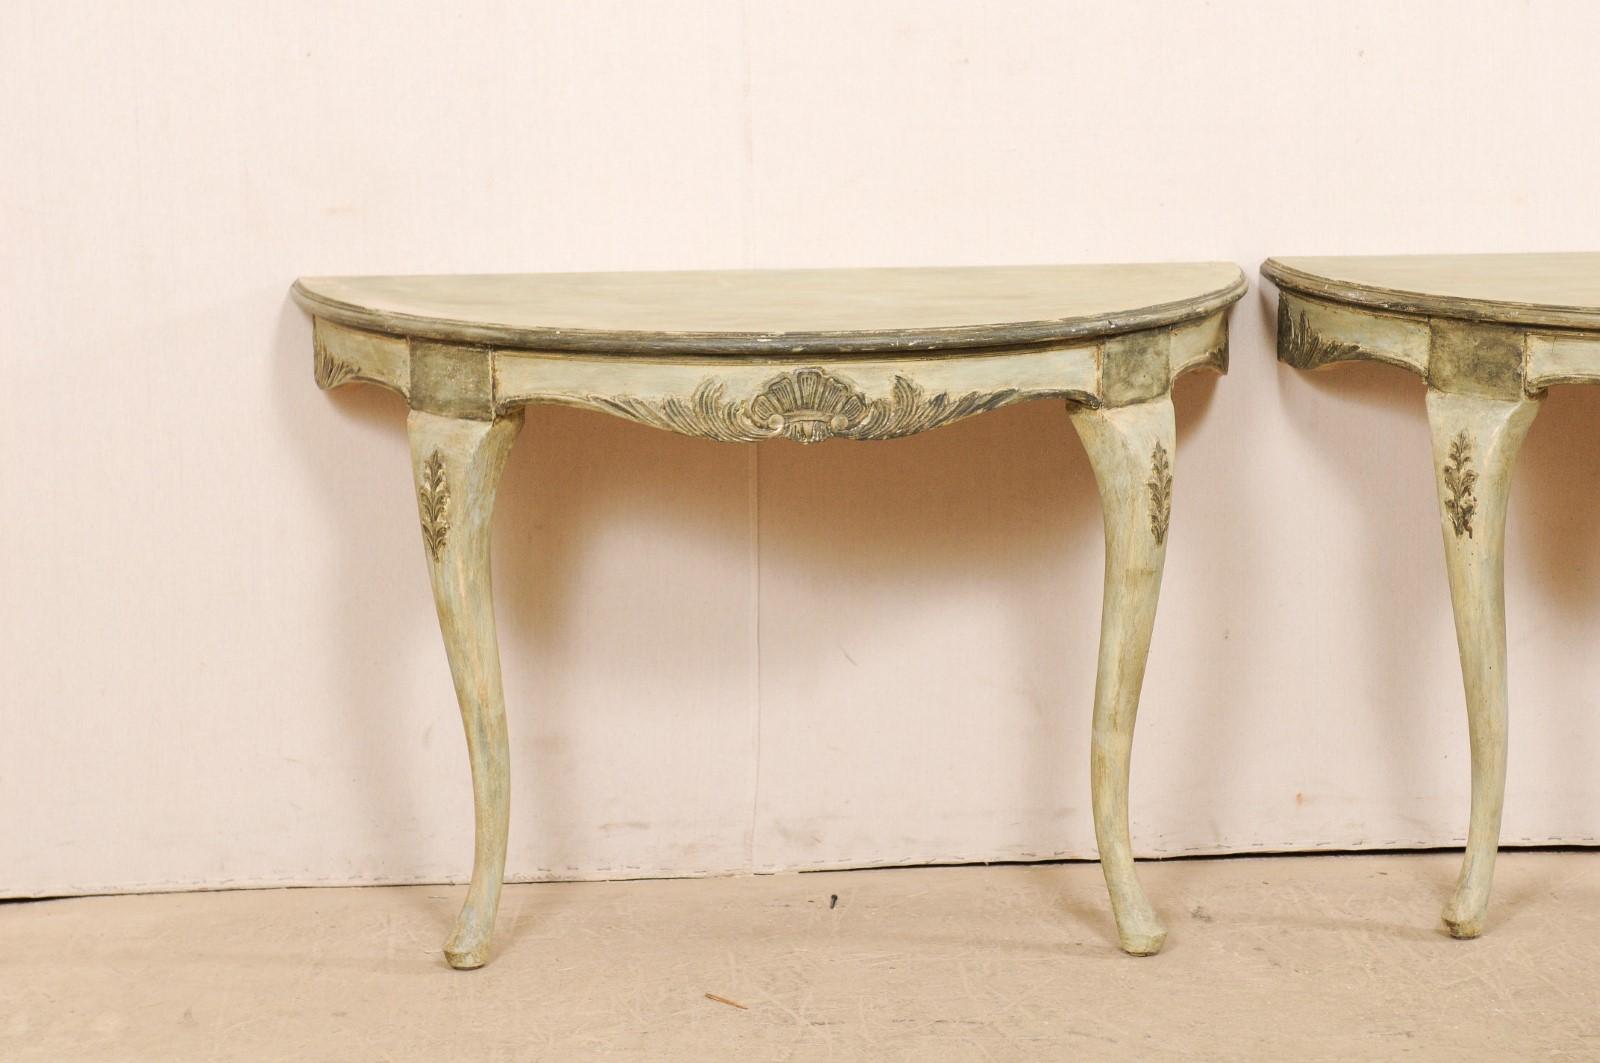 Swedish Pair of Wall-Mounted Demilune Tables with Carved Shell & Foliage Accents In Good Condition For Sale In Atlanta, GA